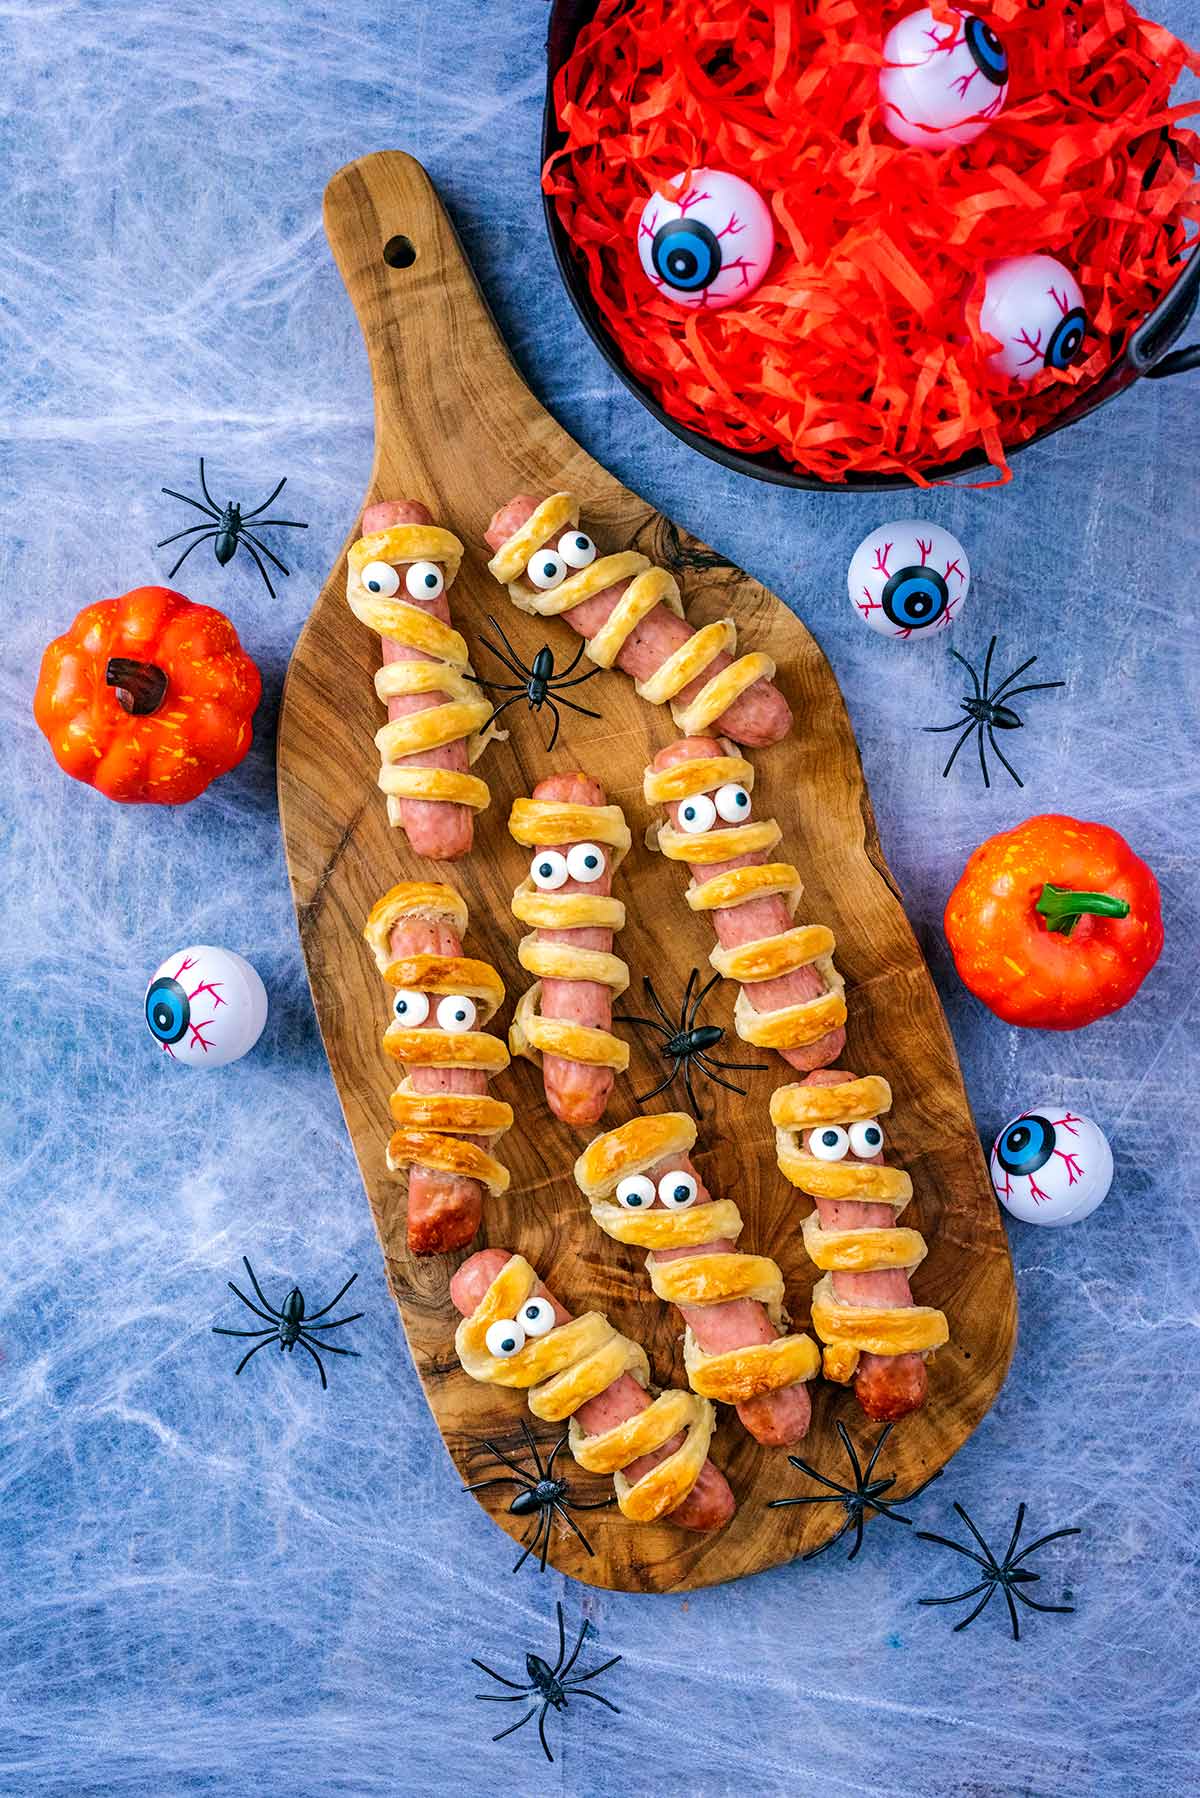 A wooden serving board with pastry wrapped sausages on it. Pumpkins, spiders and fake eyeballs surround it.